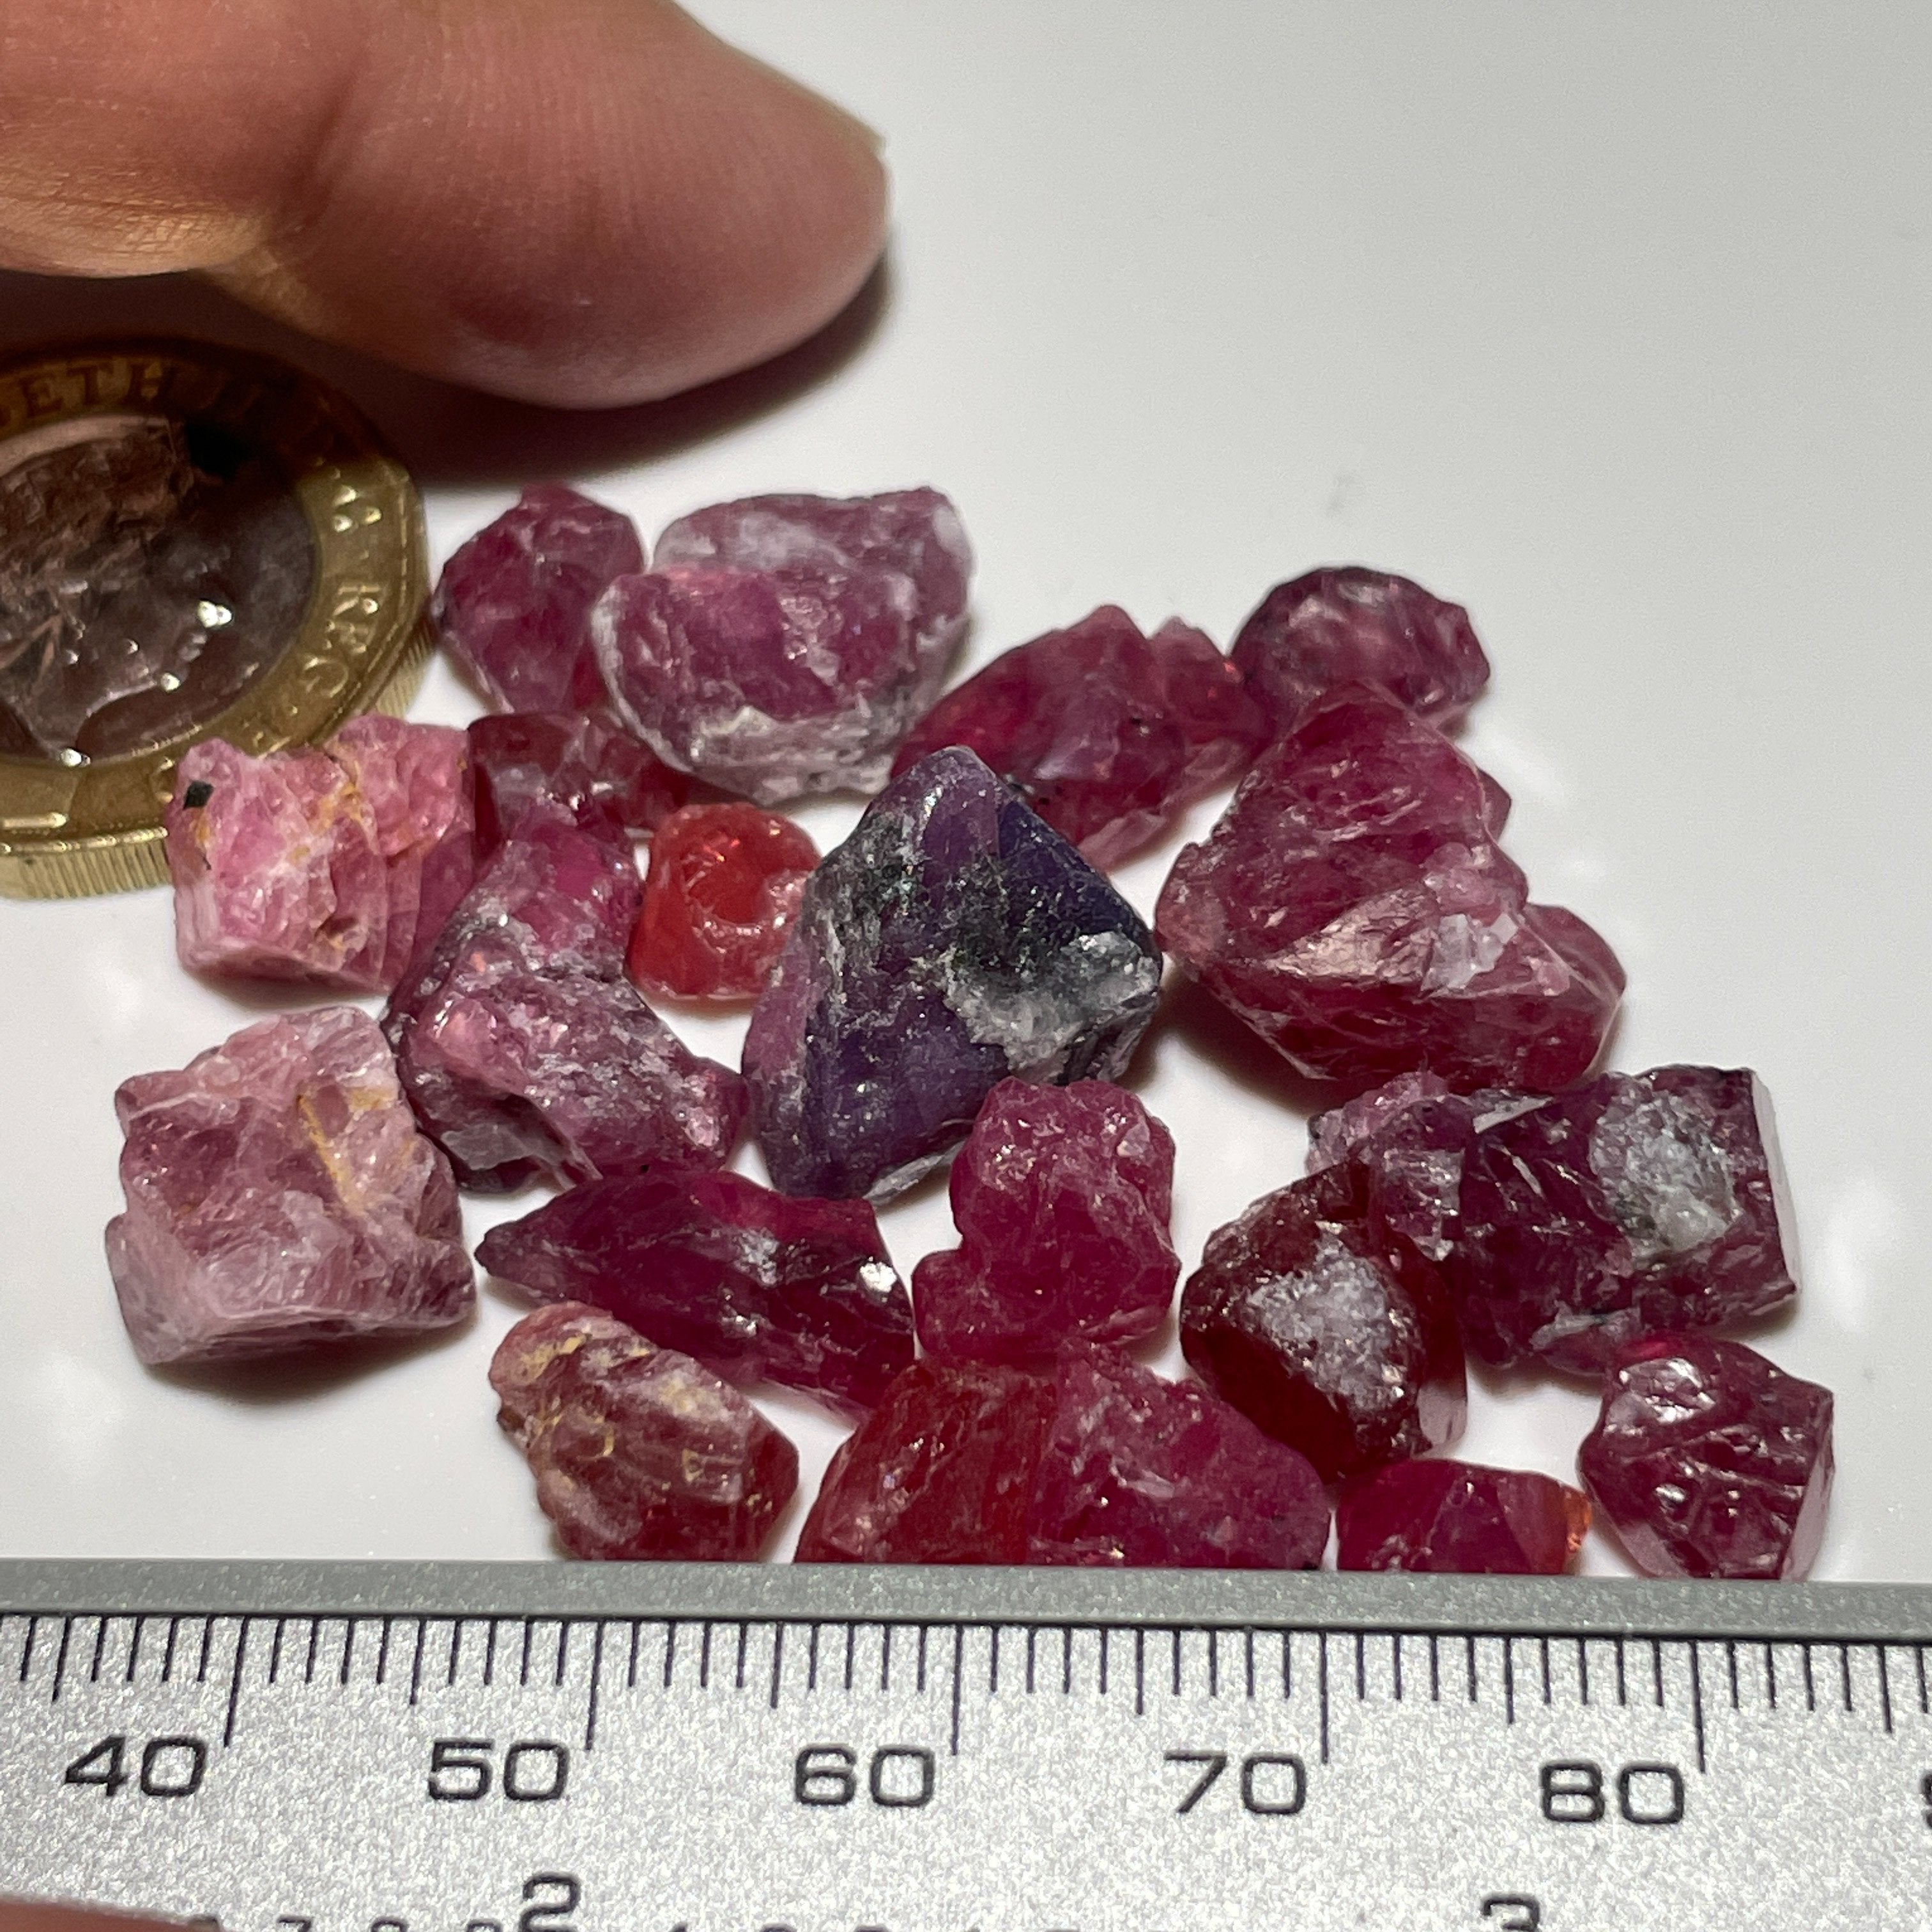 113.06Ct Mahenge Spinel Crystal Lot 1.49Ct - 13.96Ct Tanzania. Untreated Unheated. Good For Setting